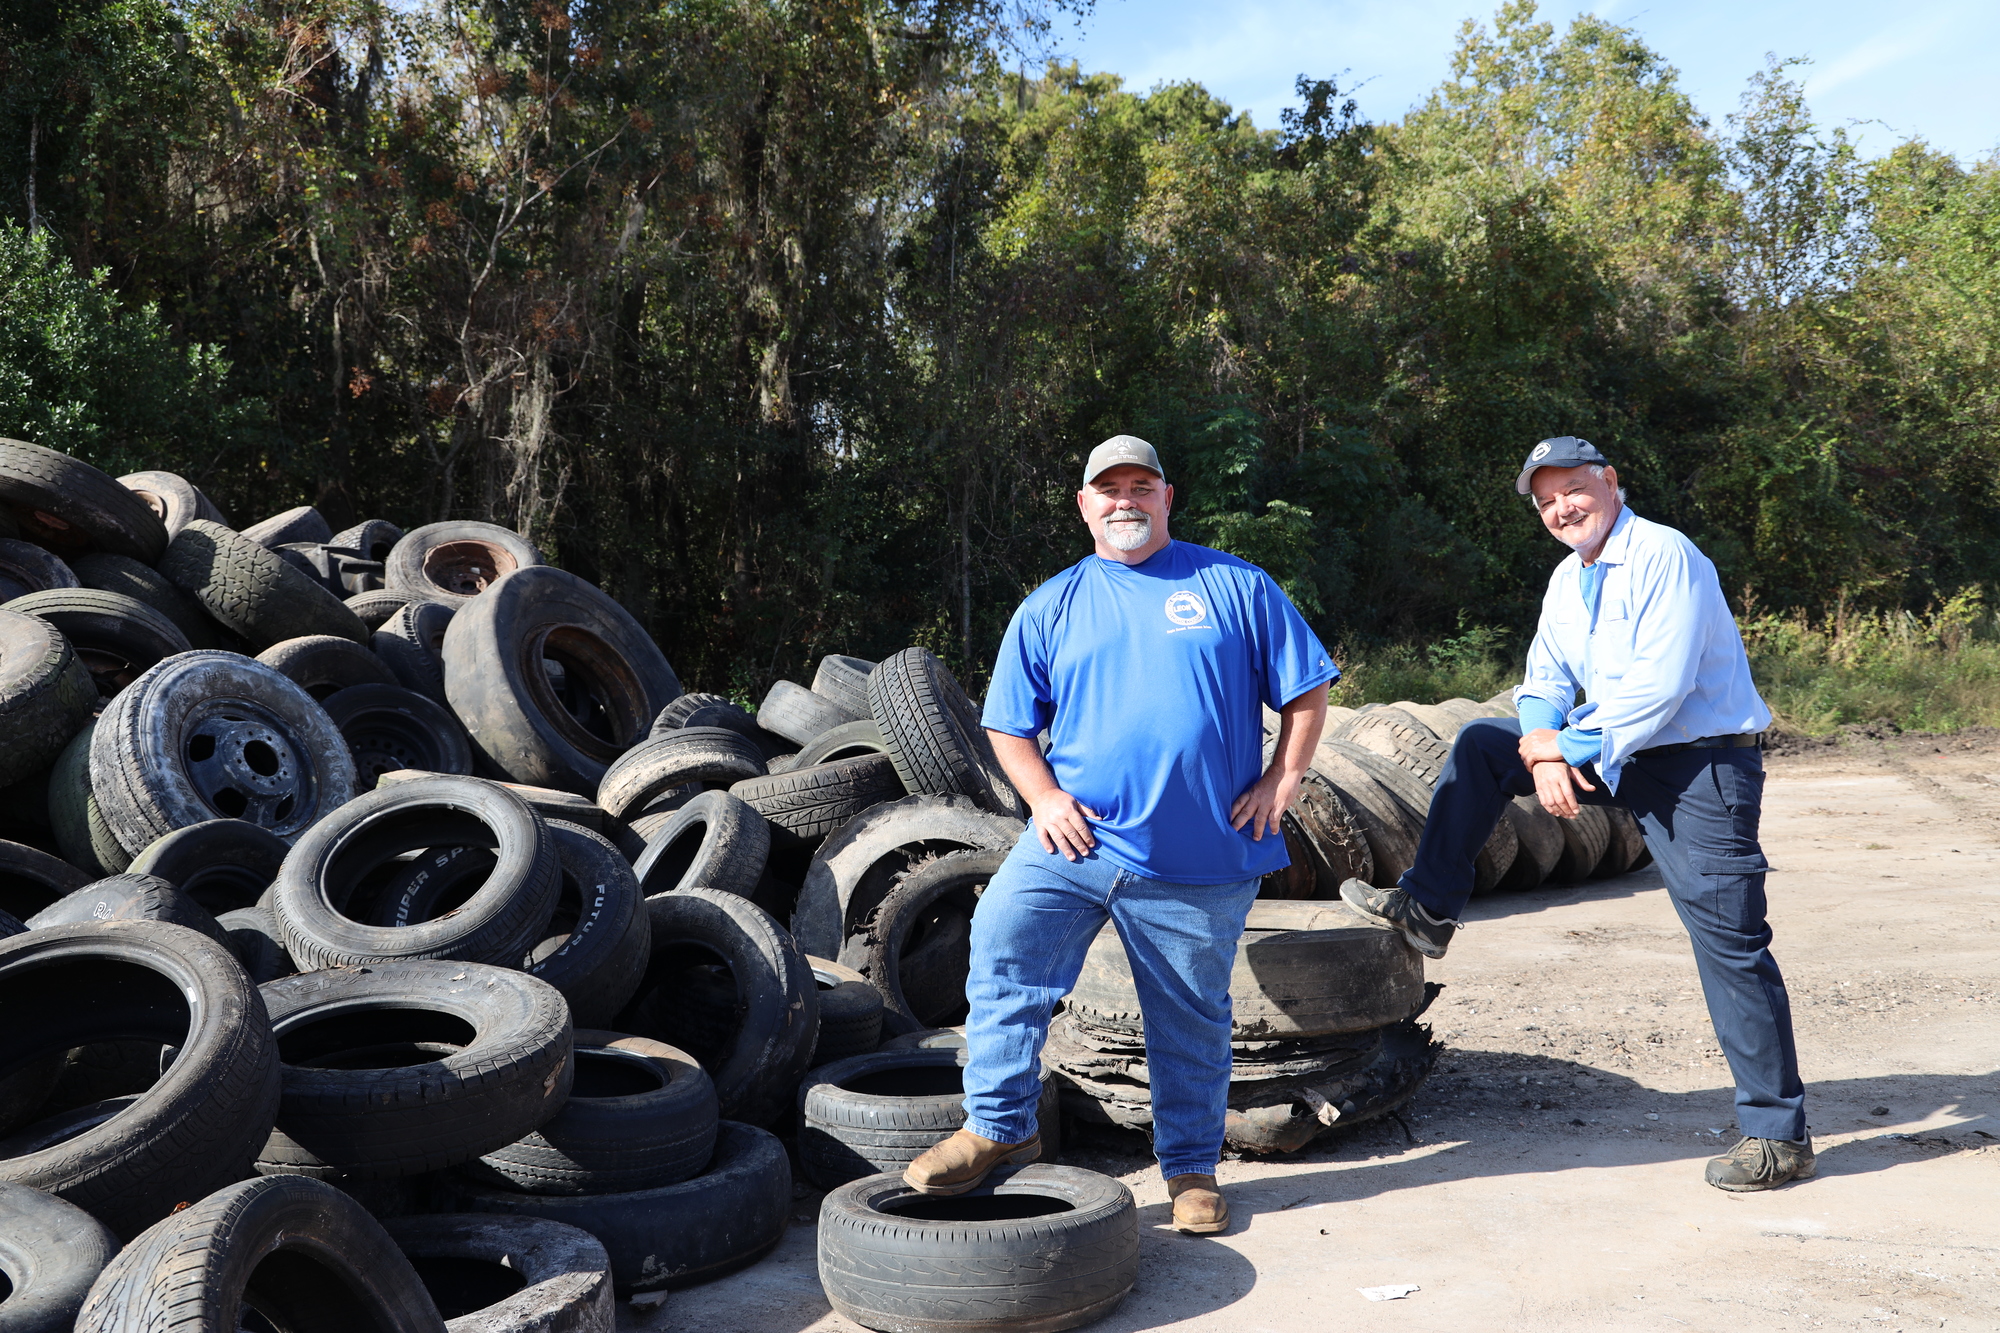 D.J. Newsome & Mike Hamilton move collected tires before they are transferred to a processing facility.